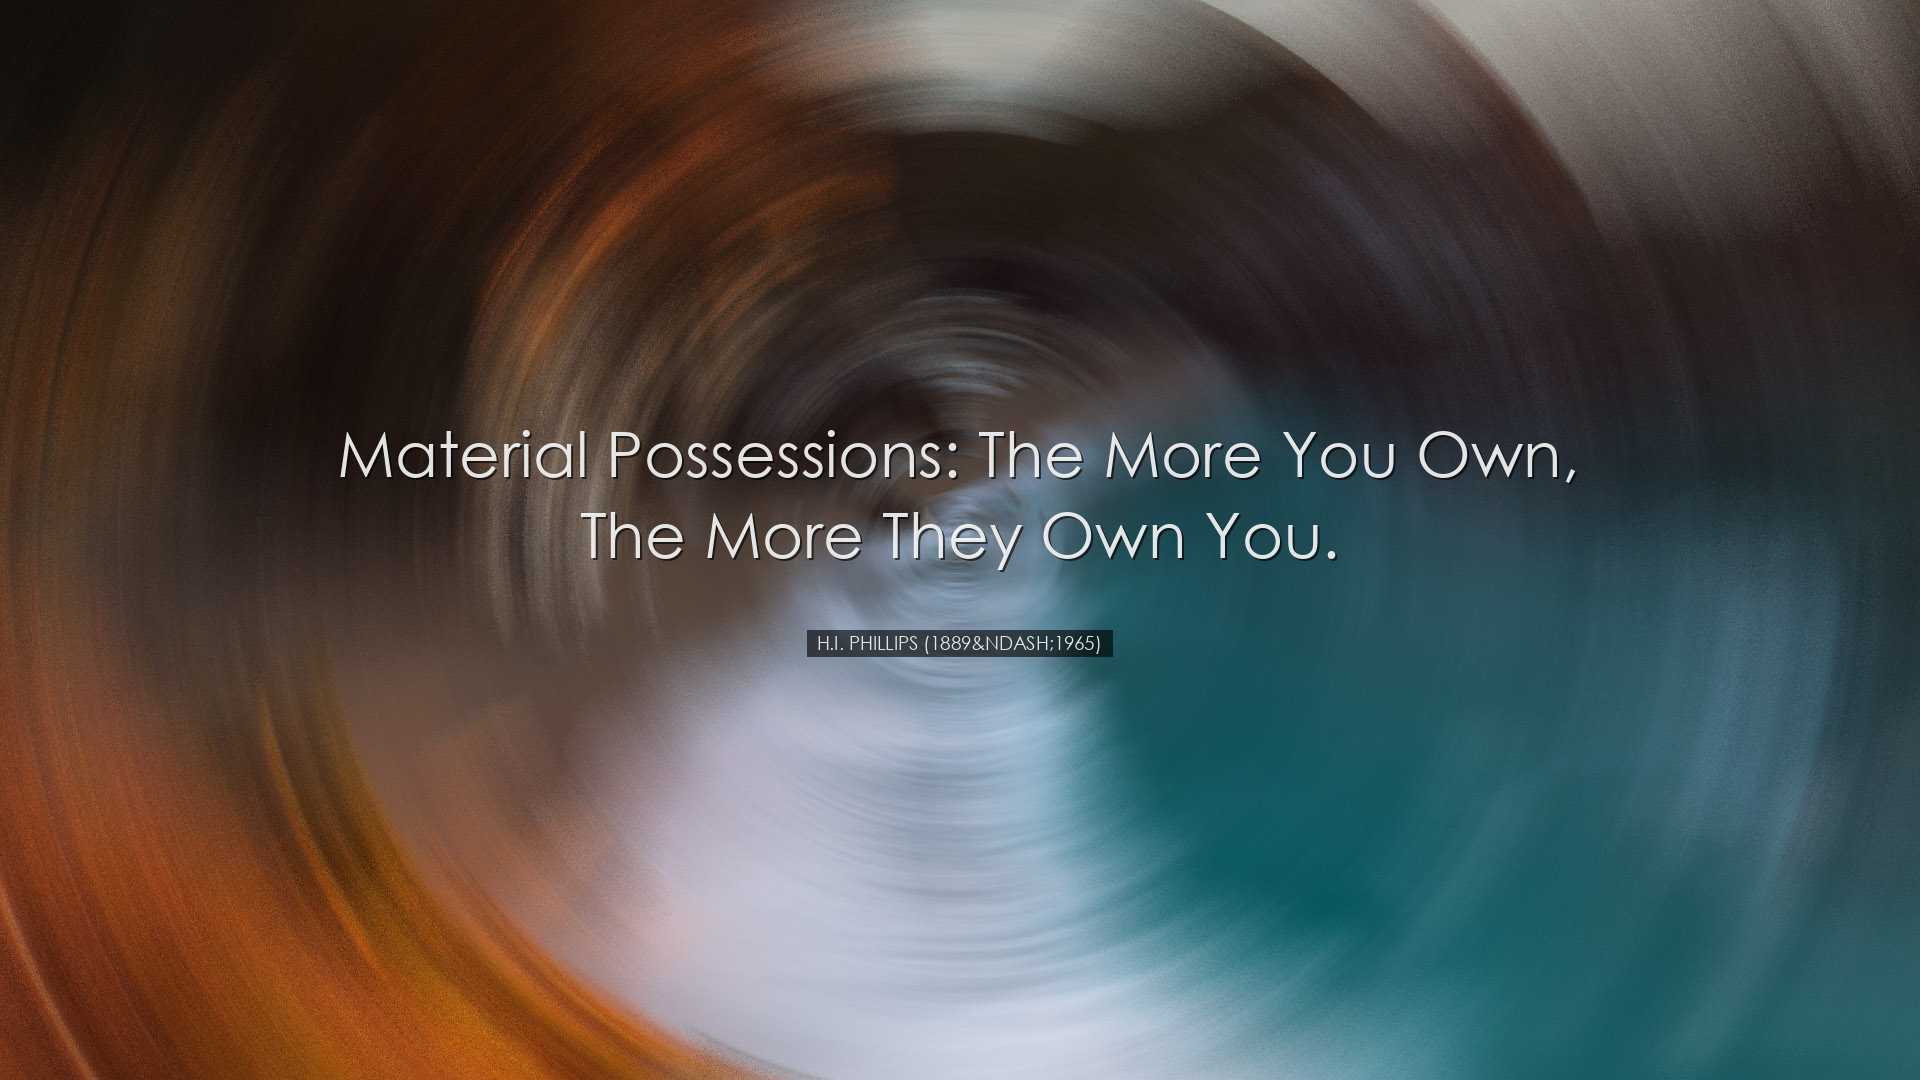 Material possessions: the more you own, the more they own you. - H